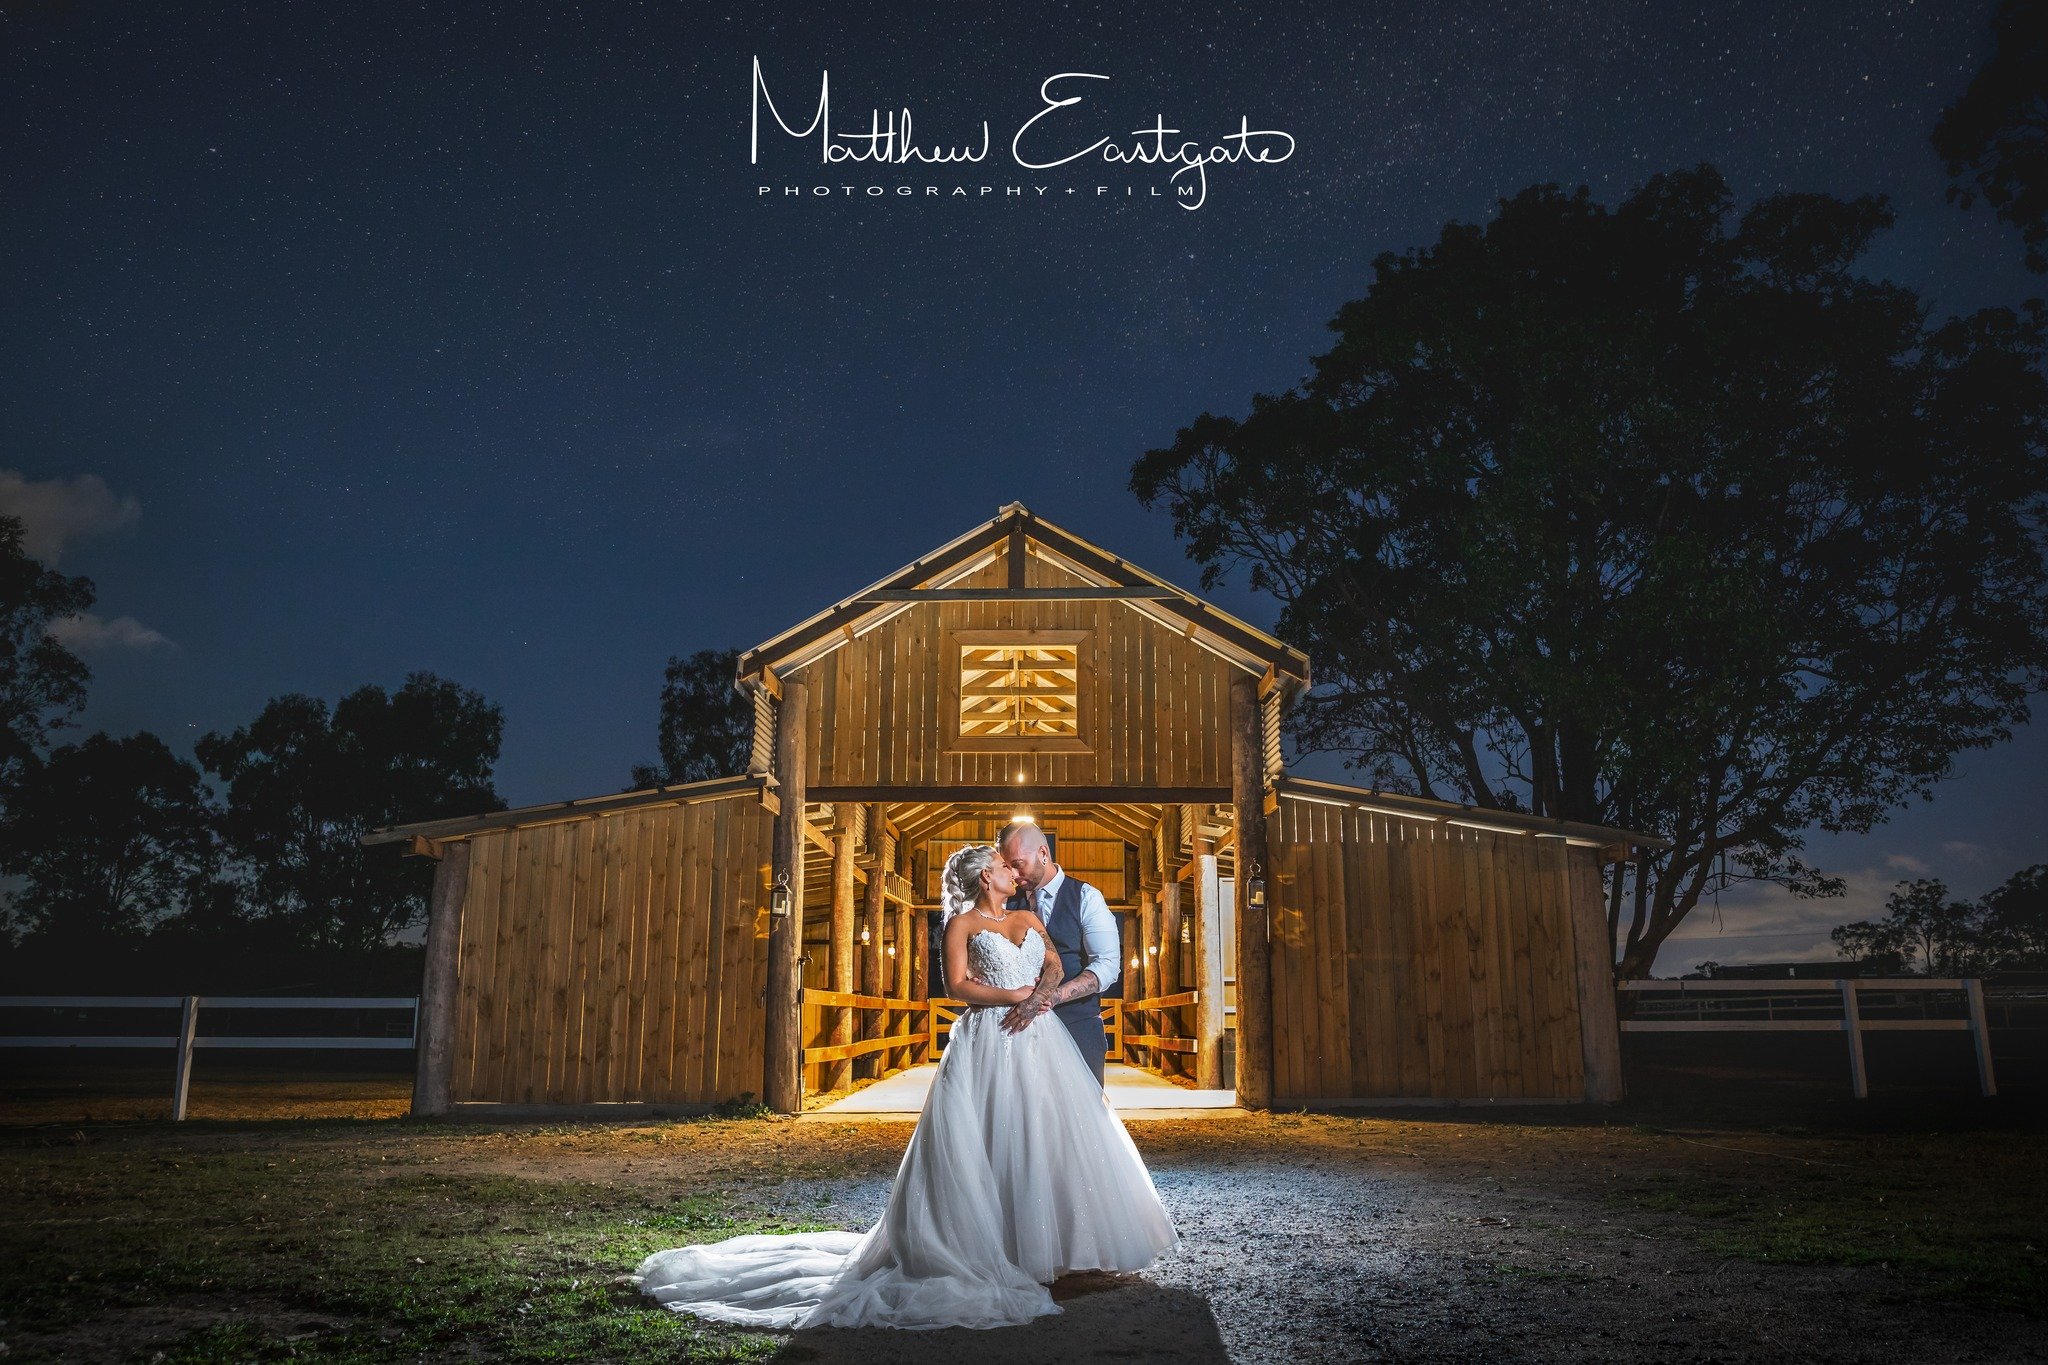 Ceremony Photo  Barn by Matthew Eastgate Photography -.jpg